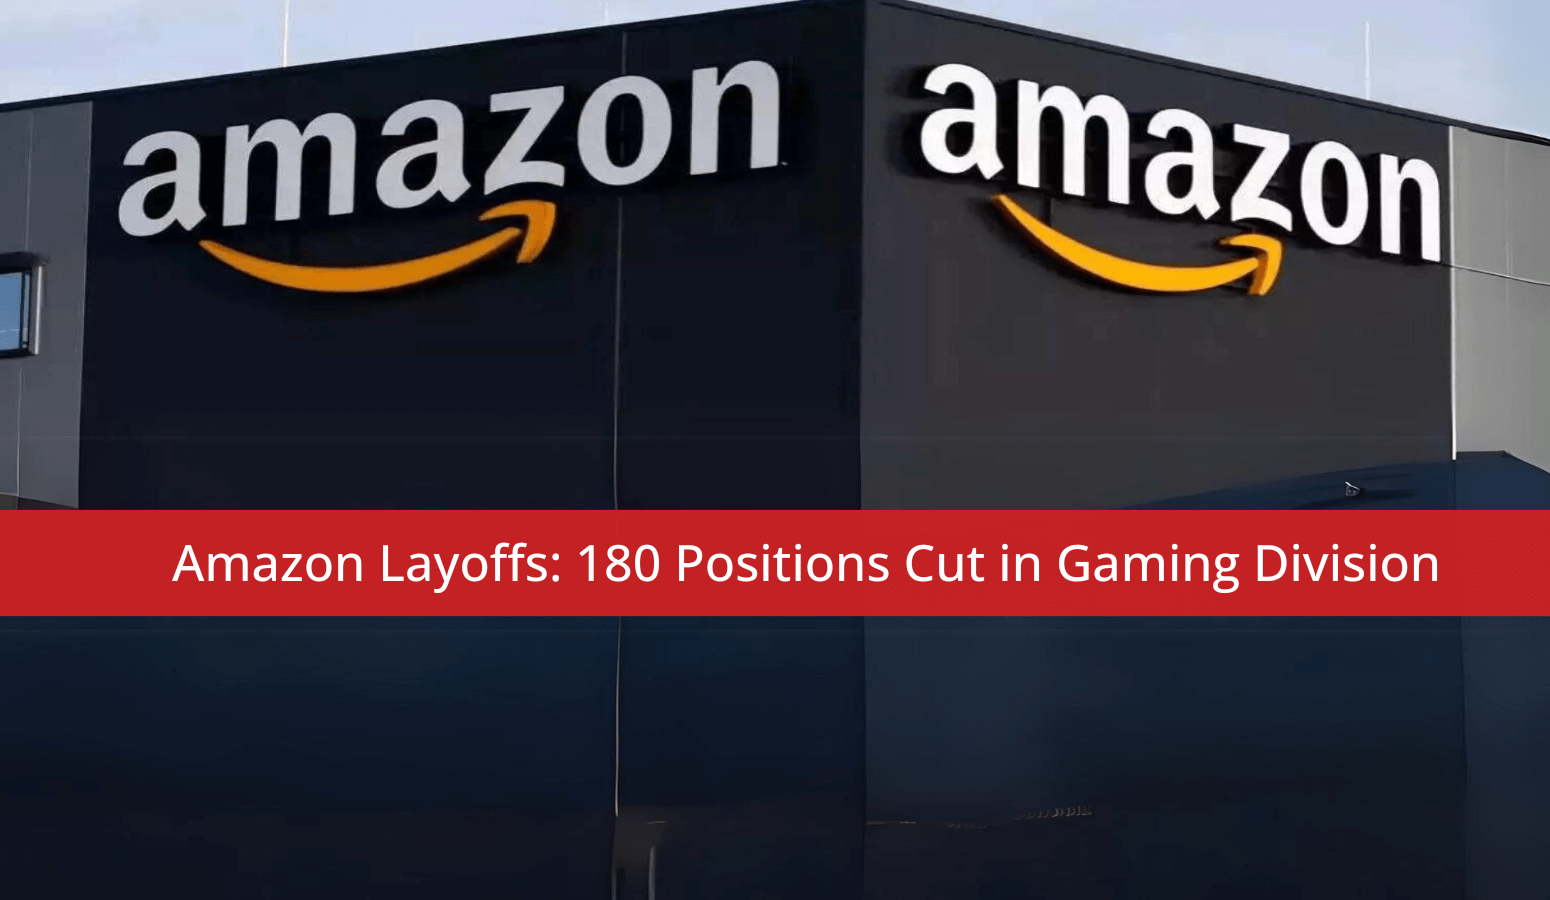 Featured image for “Amazon Layoffs: 180 Positions Cut in Gaming Division”